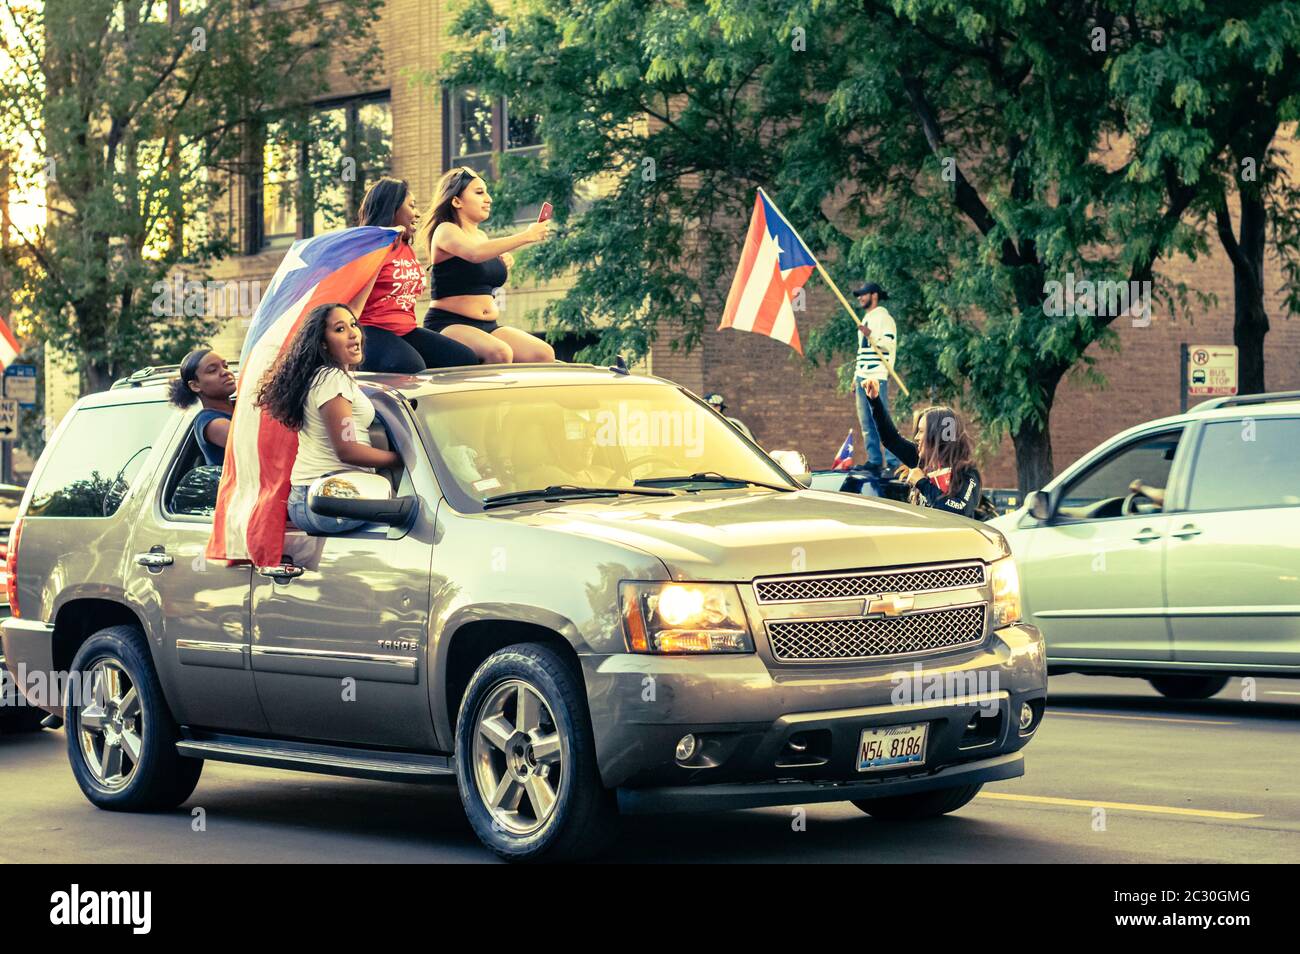 Chicago, USA-June 14, 2020: Hundreds of cars form a caravan in the Humboldt Park neighborhood to express Puerto Rican pride Stock Photo